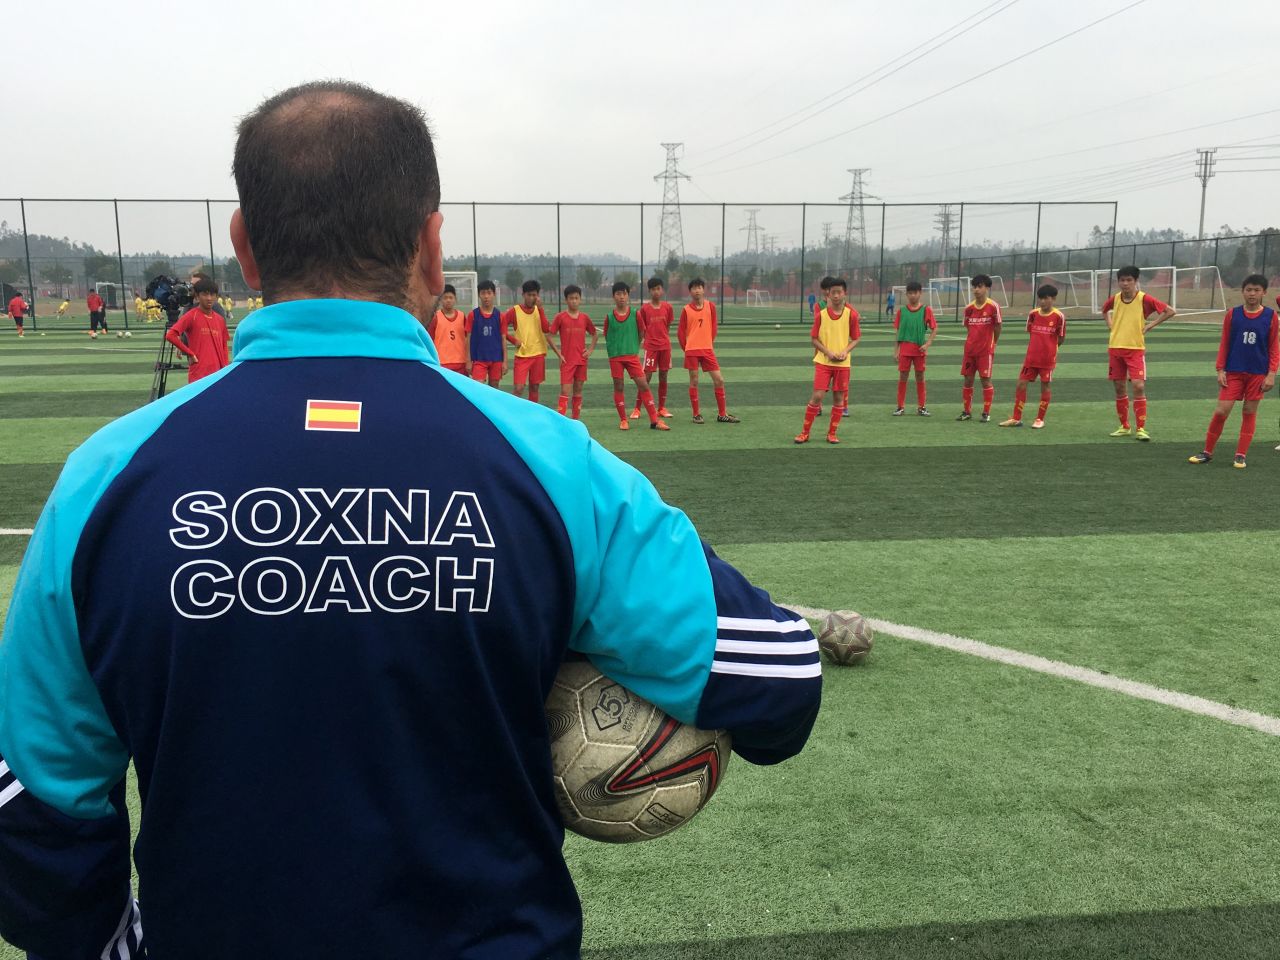 Sergio Zarco Diaz, who has been coaching in China for four years, runs his sessions at the school alongside a translator. "What we notice is the children are at a high technical level, but the greatest difference is tactically," the Spaniard explains.